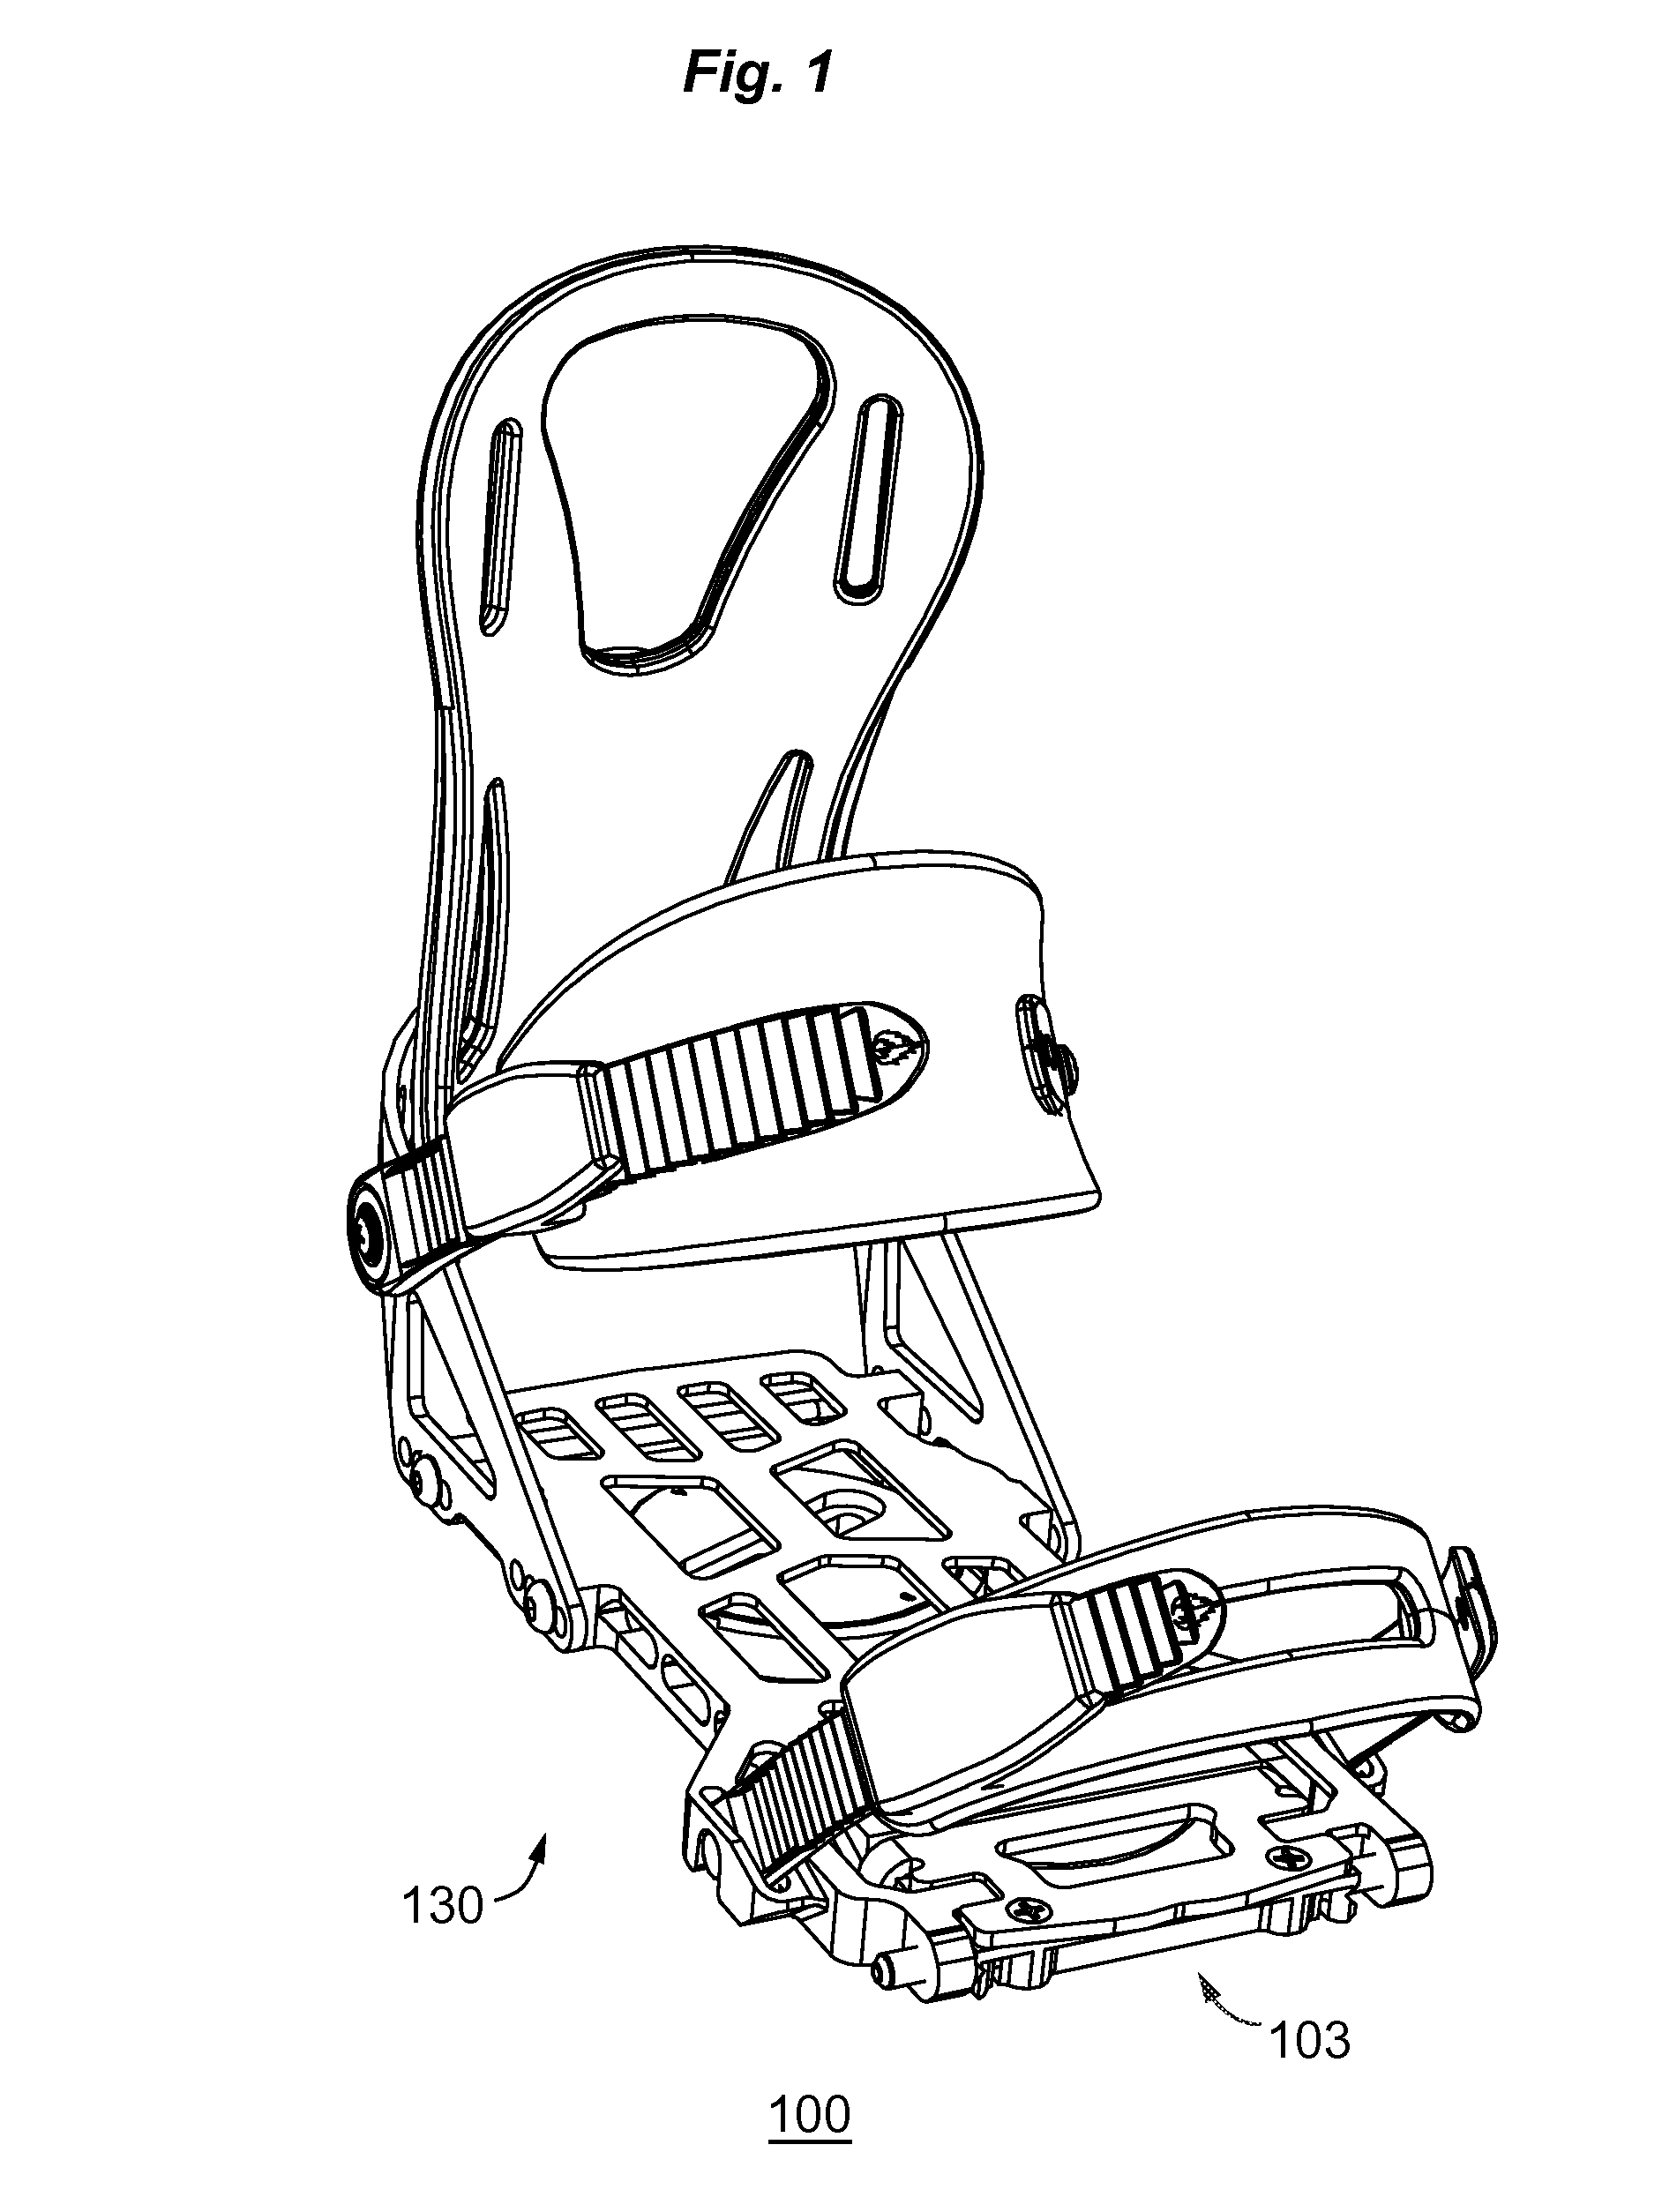 Boot binding system with foot latch pedal